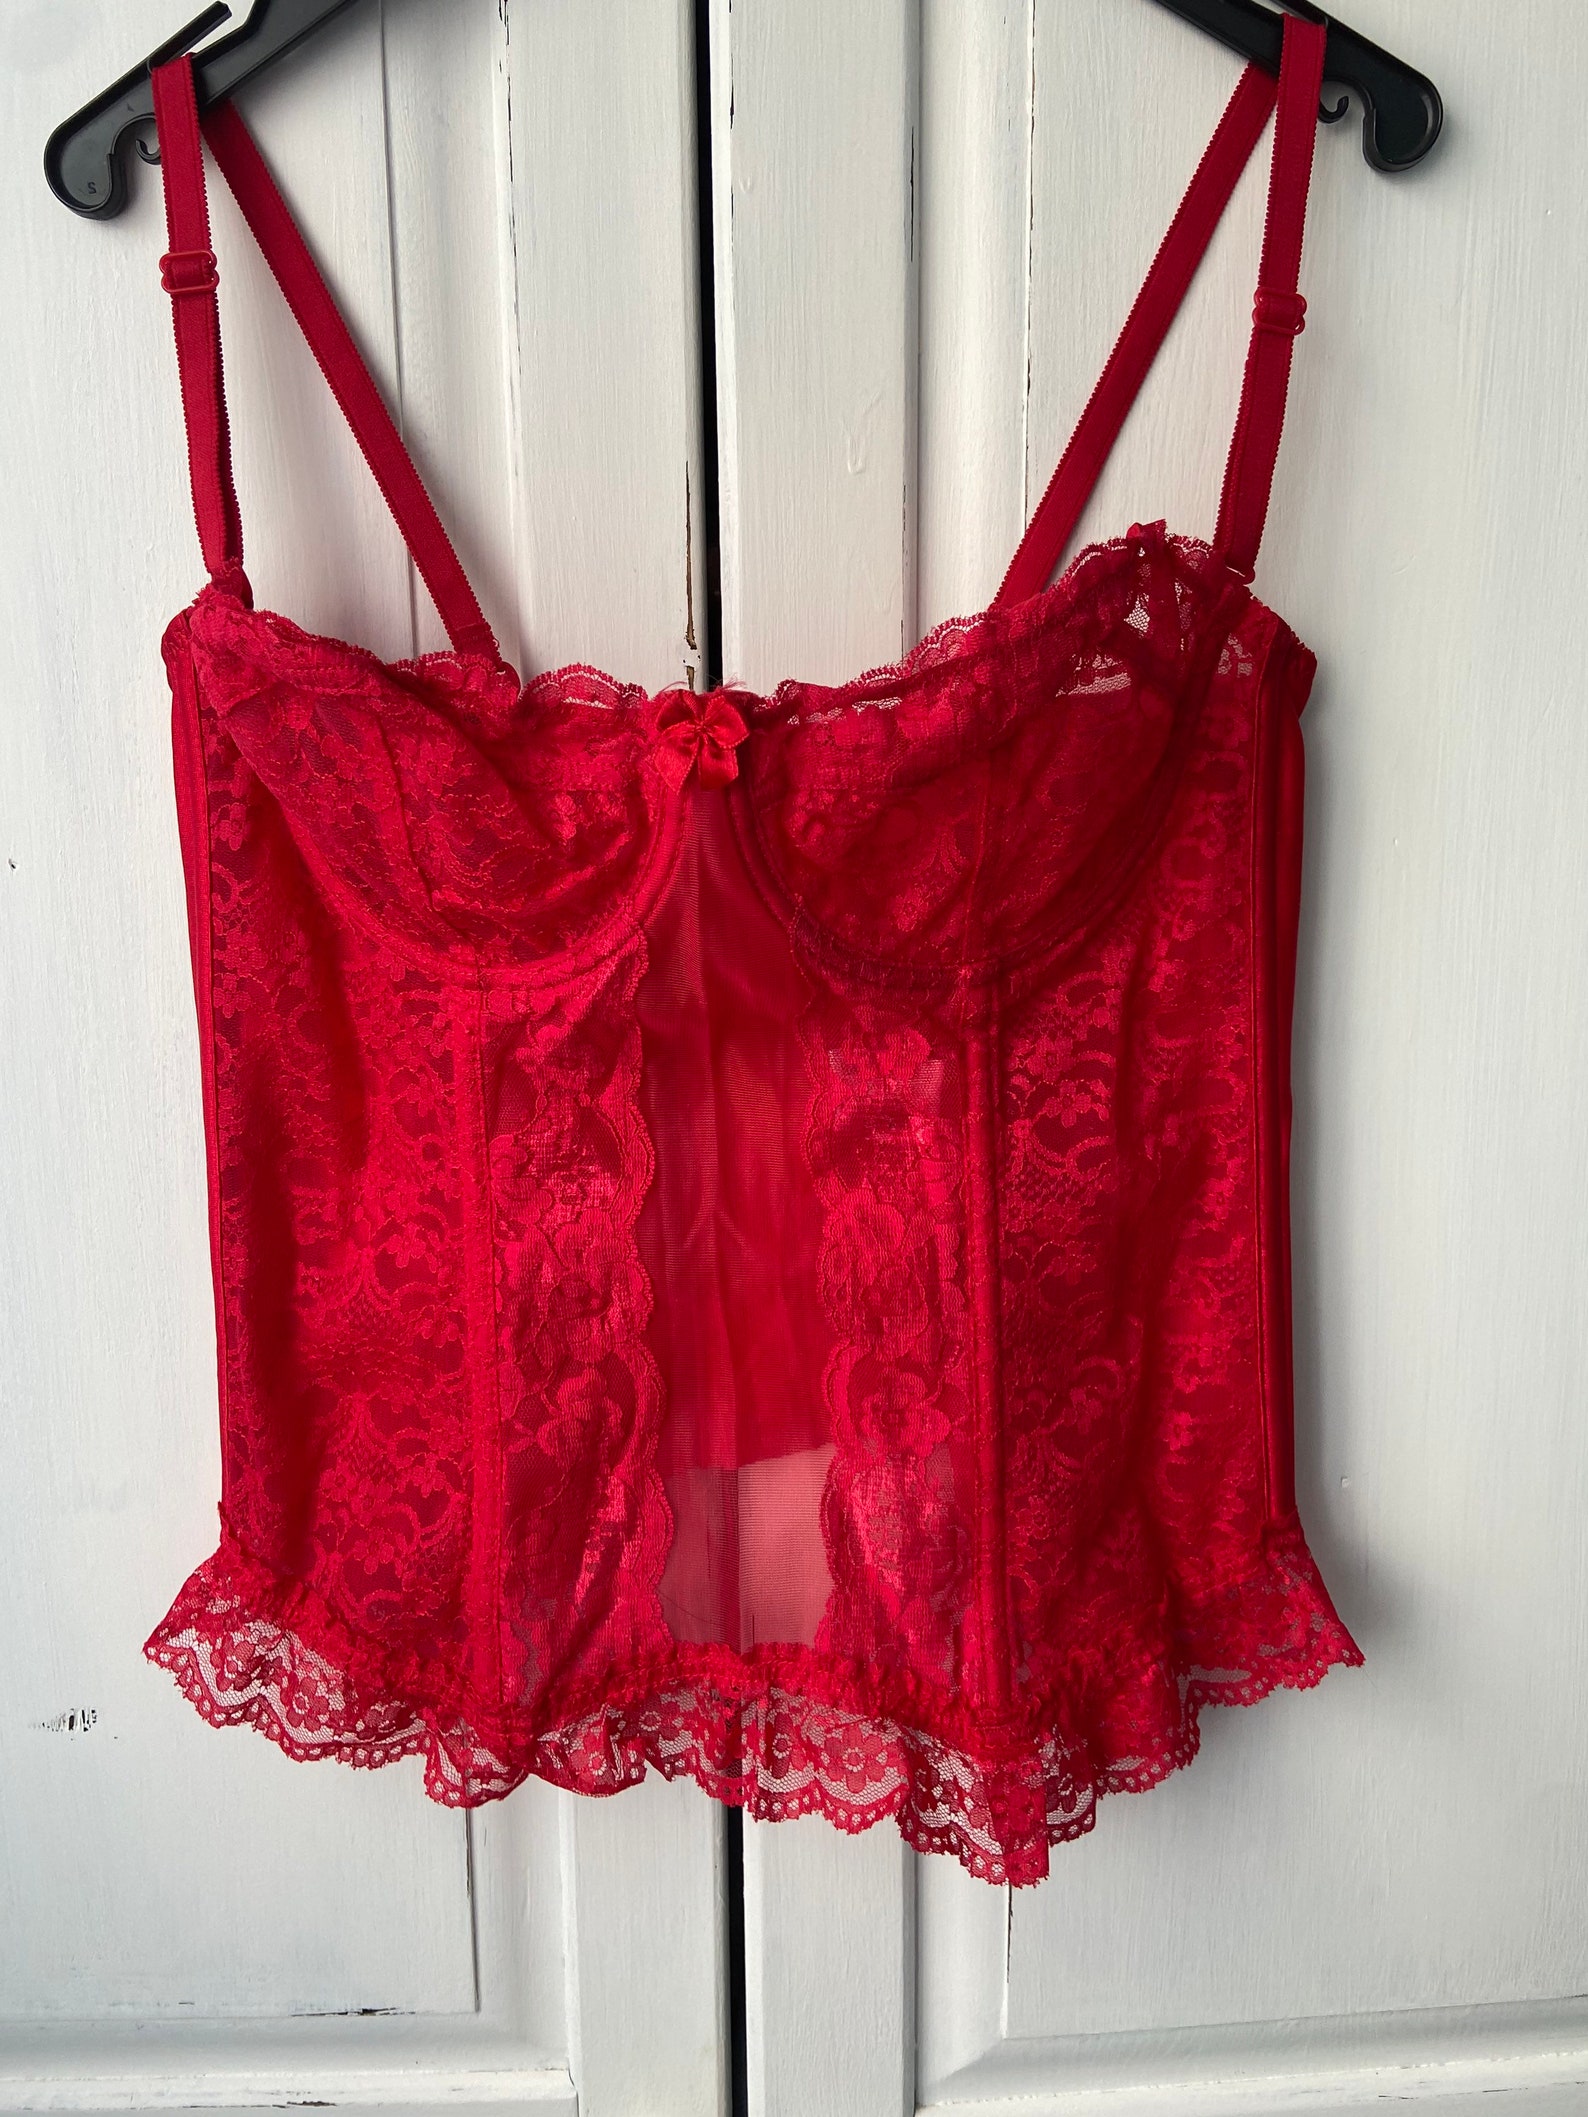 Uk 38b bustier vintage 2k 90s basque corset lingerie sexy red | Etsy